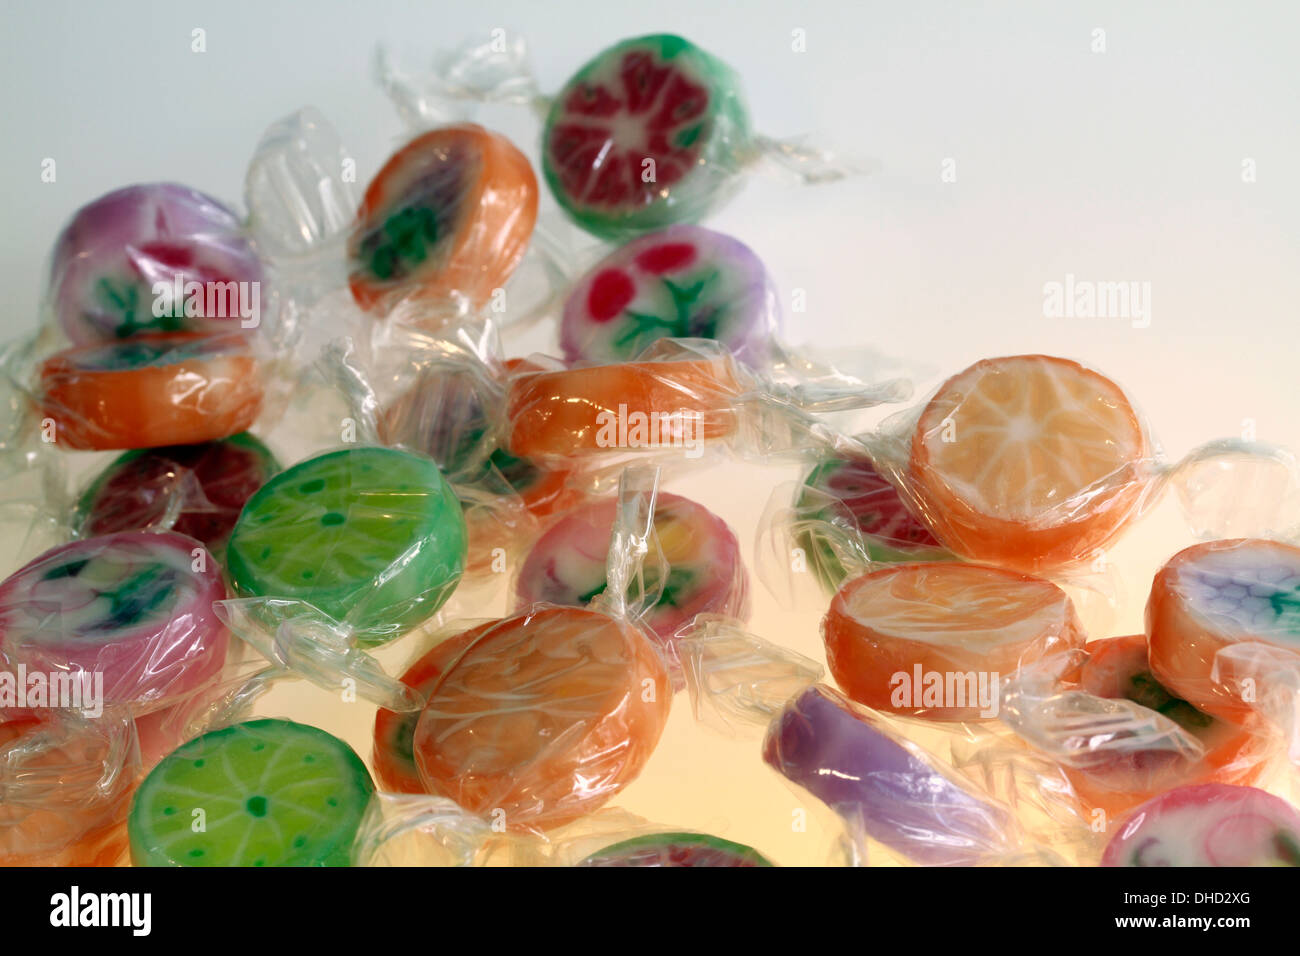 Brightly coloured rock candy sweets in cellophane wrappings. Stock Photo